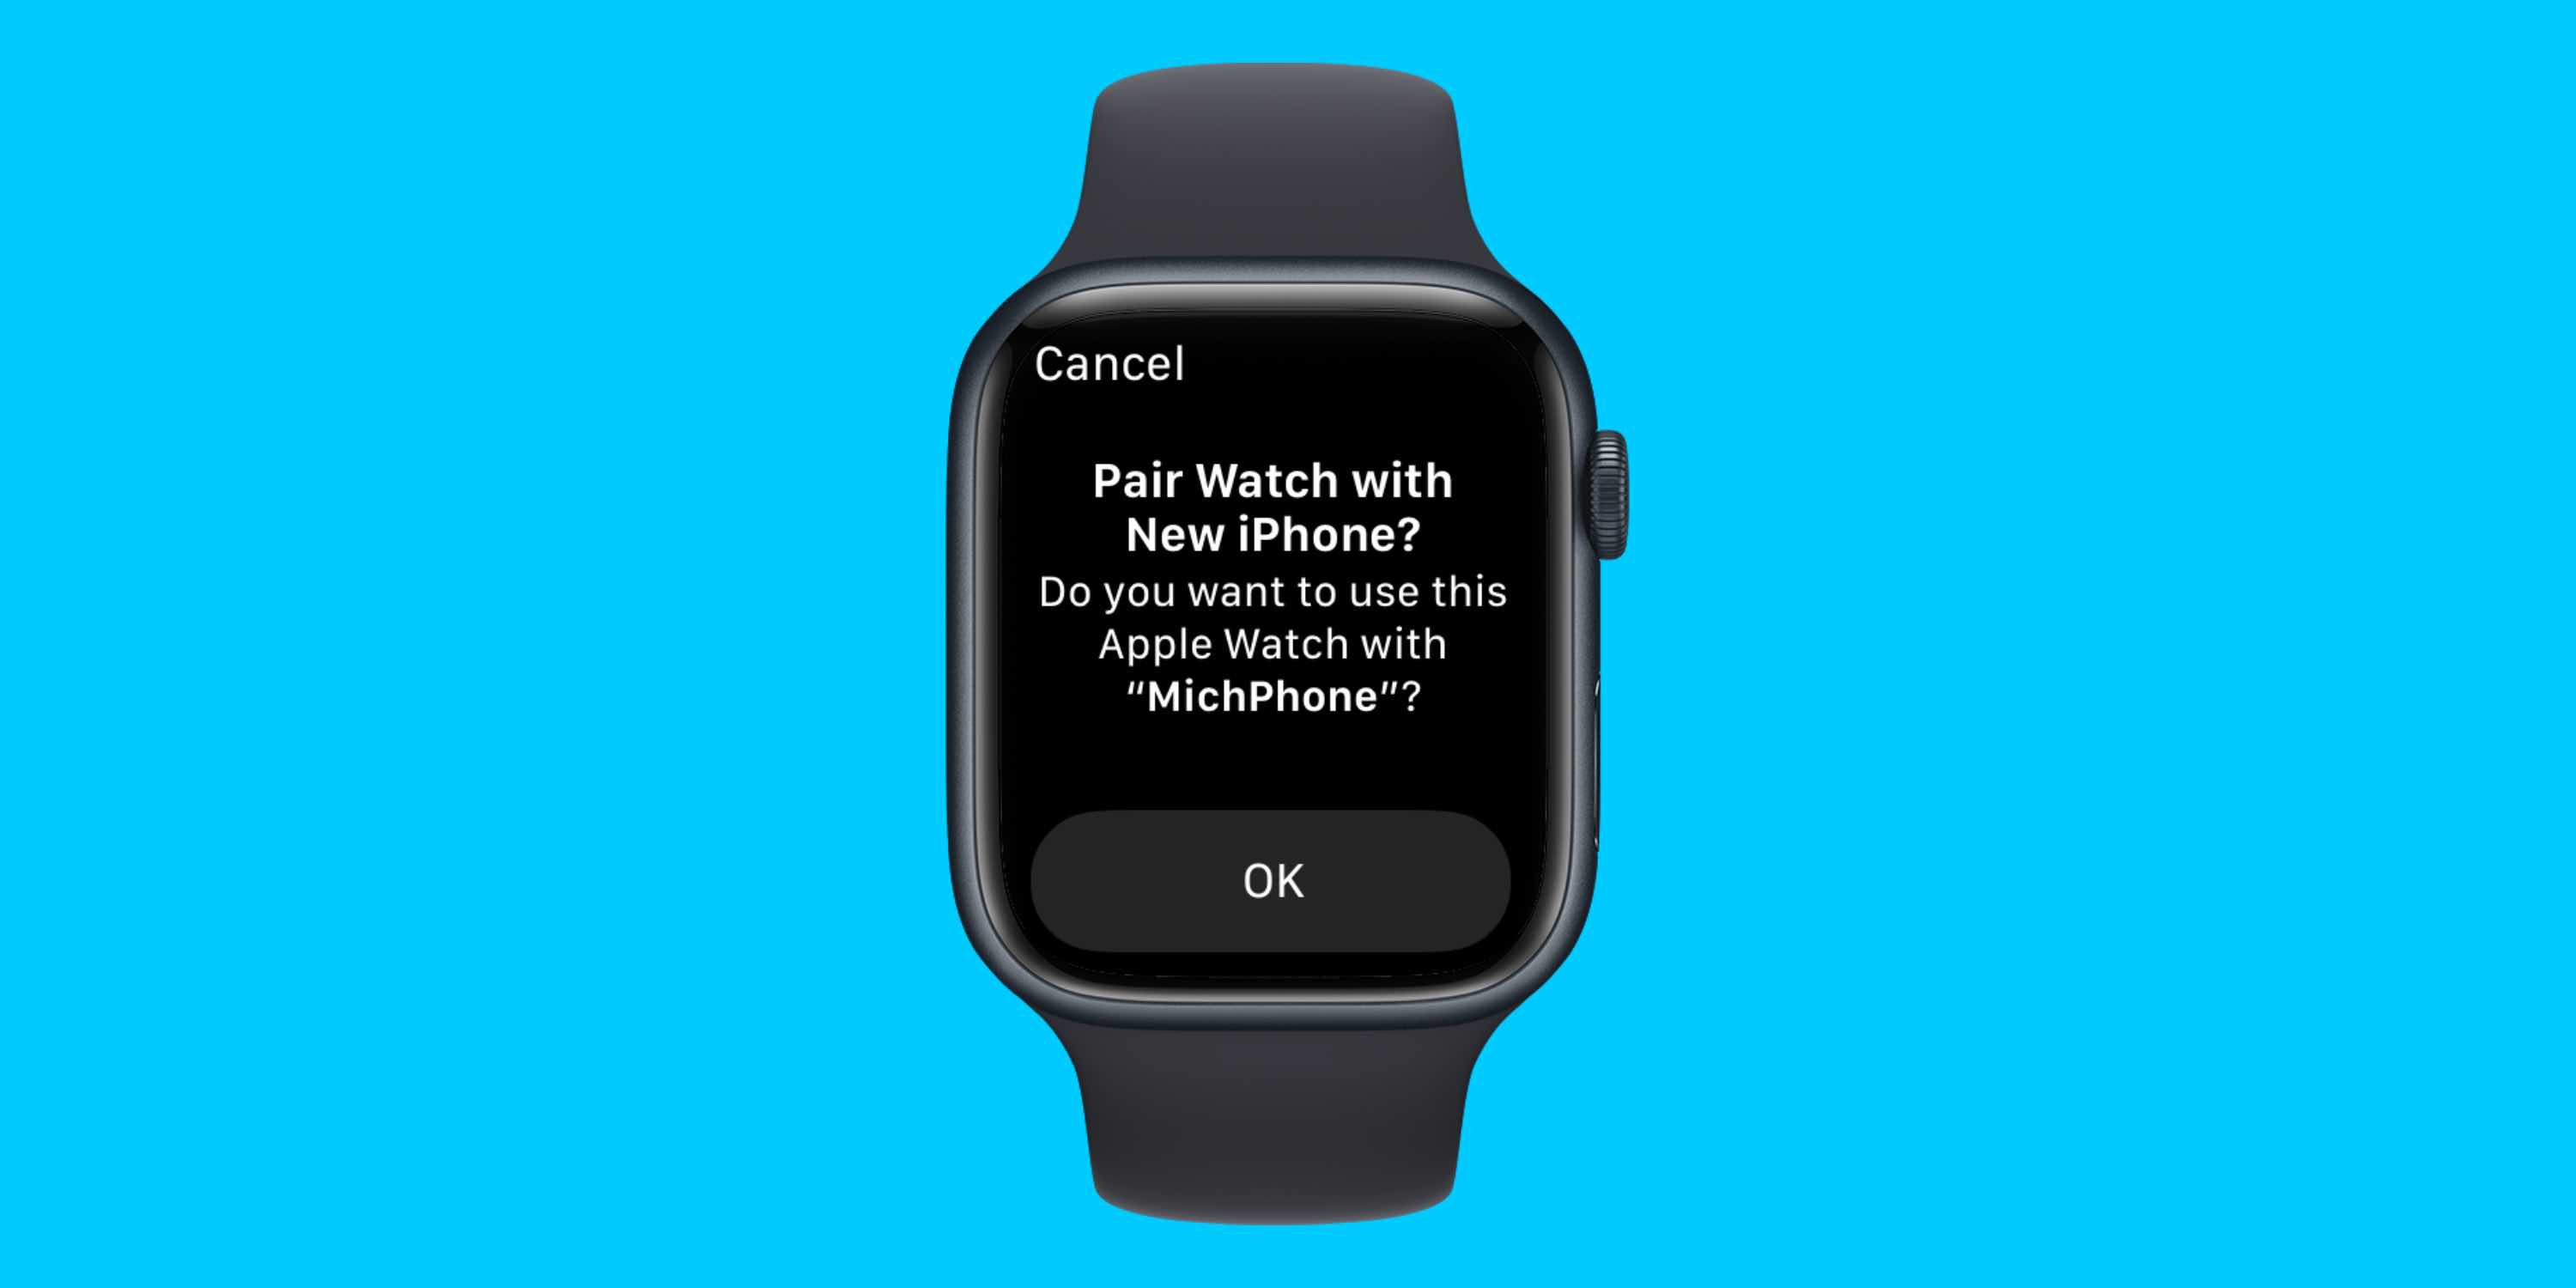 Pair your new iPhone with Apple Watch